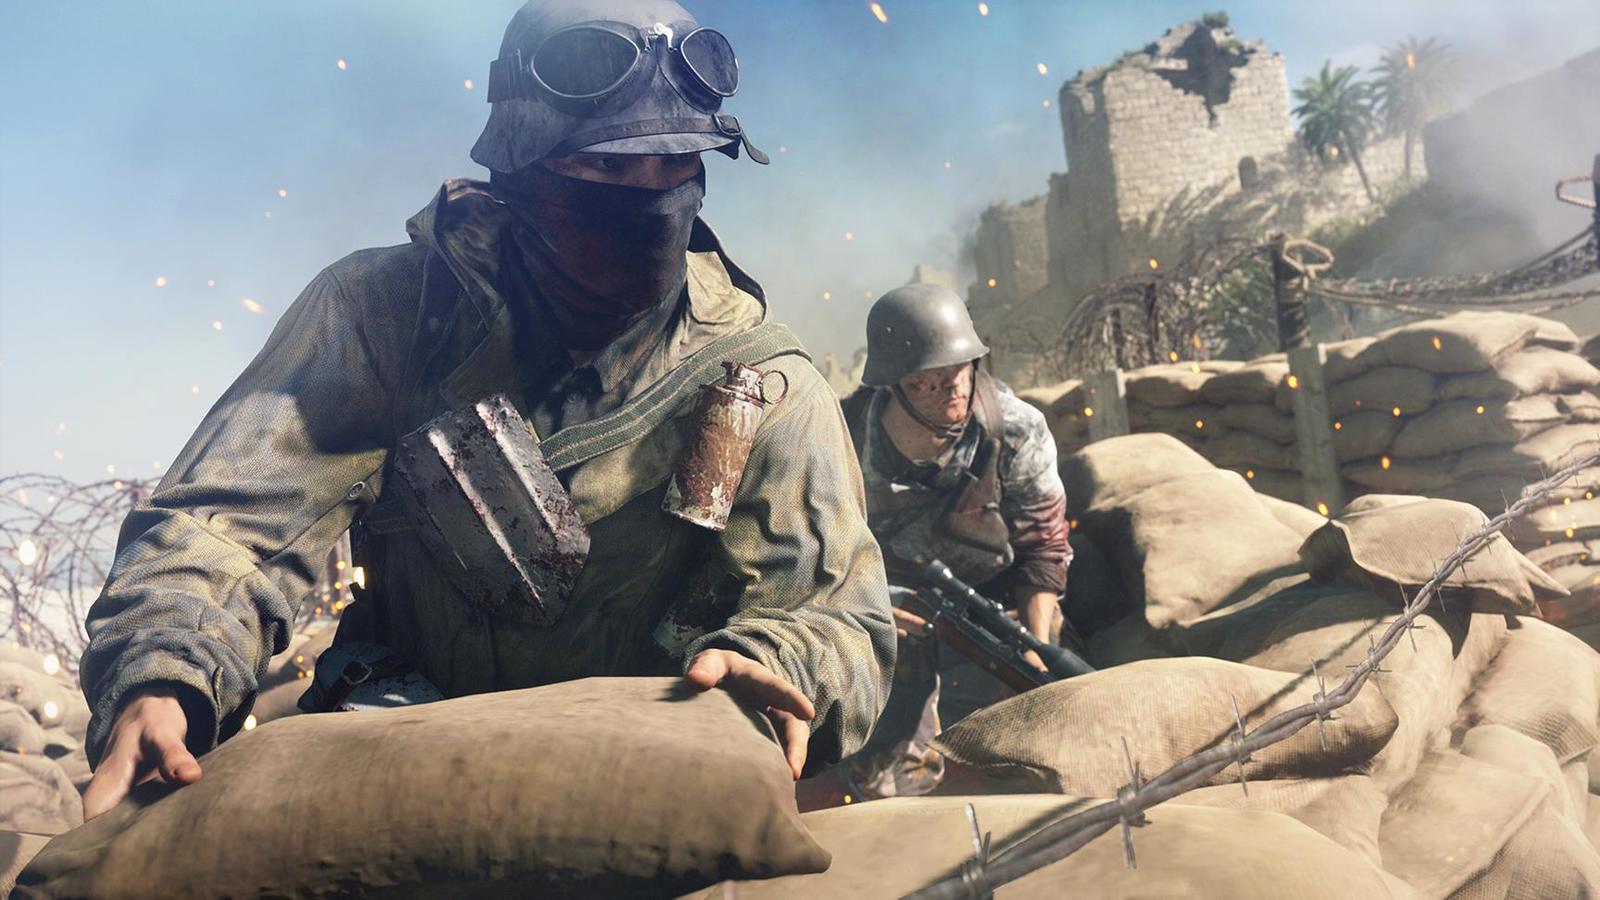 Battlefield 5 for new players and series veterans